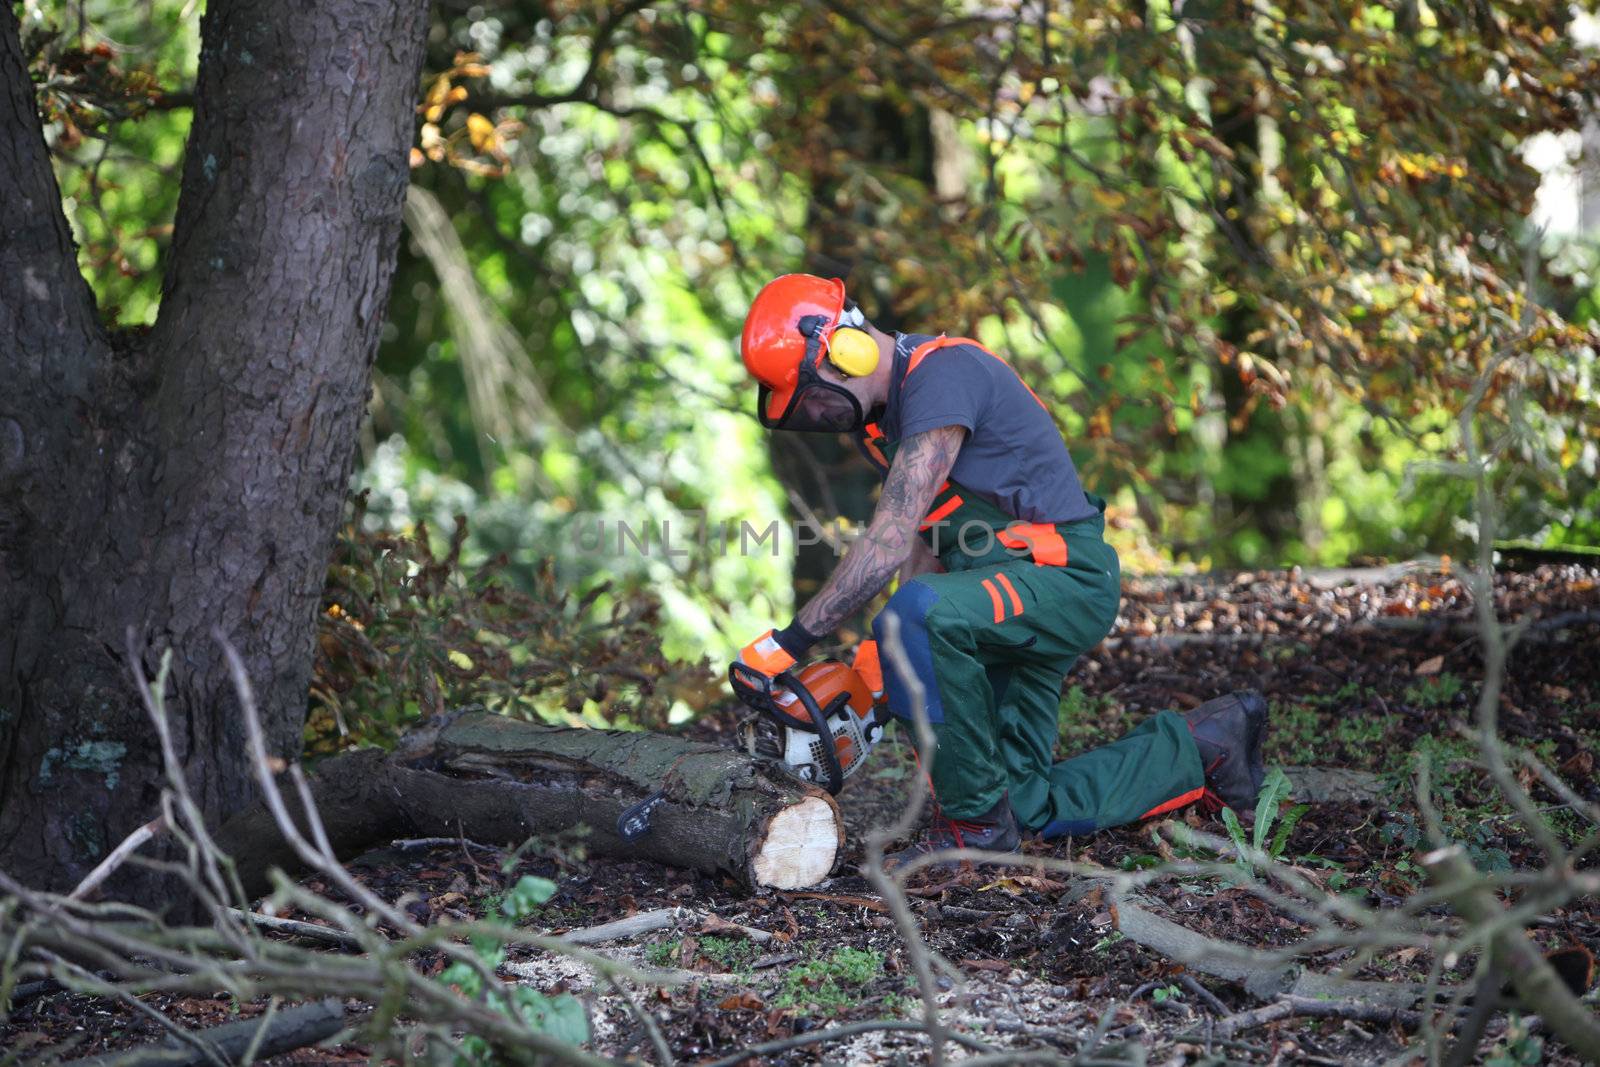 A forestry worker sawing a tree trunk. He is wearing protective clothing